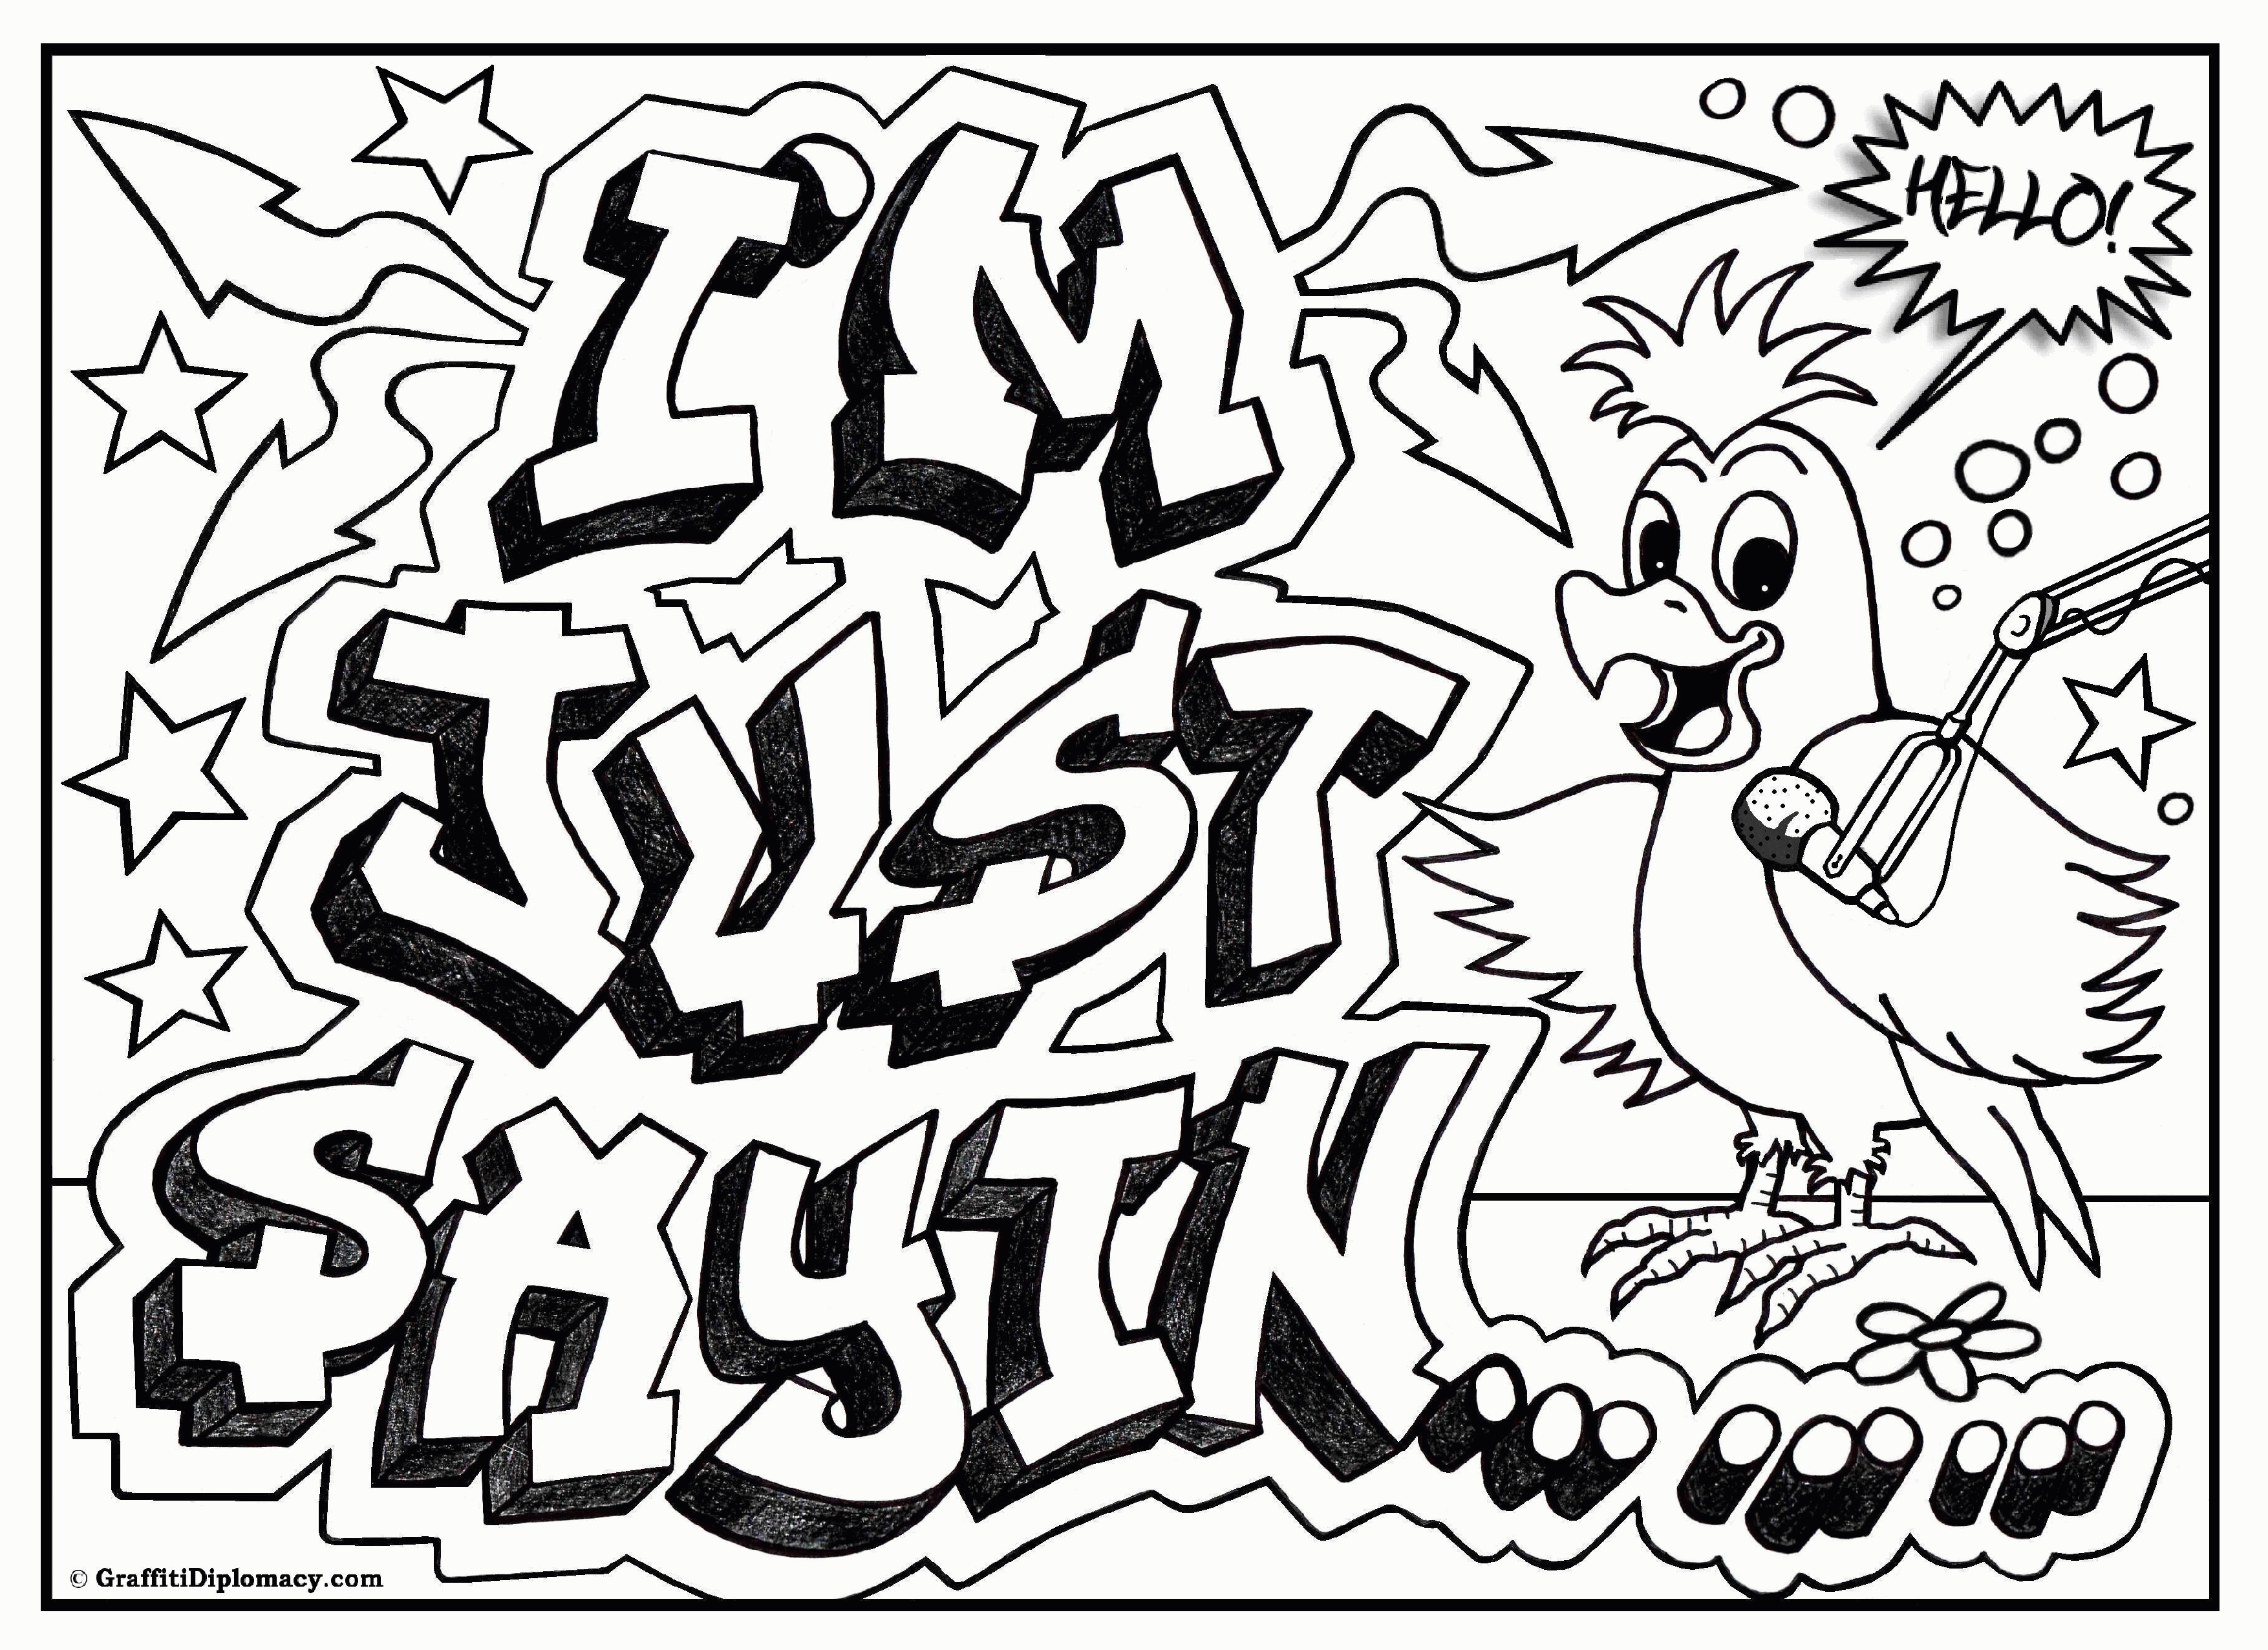 Free Coloring Pages For Teenagers Graffiti Download Free Coloring Pages For Teenagers Graffiti